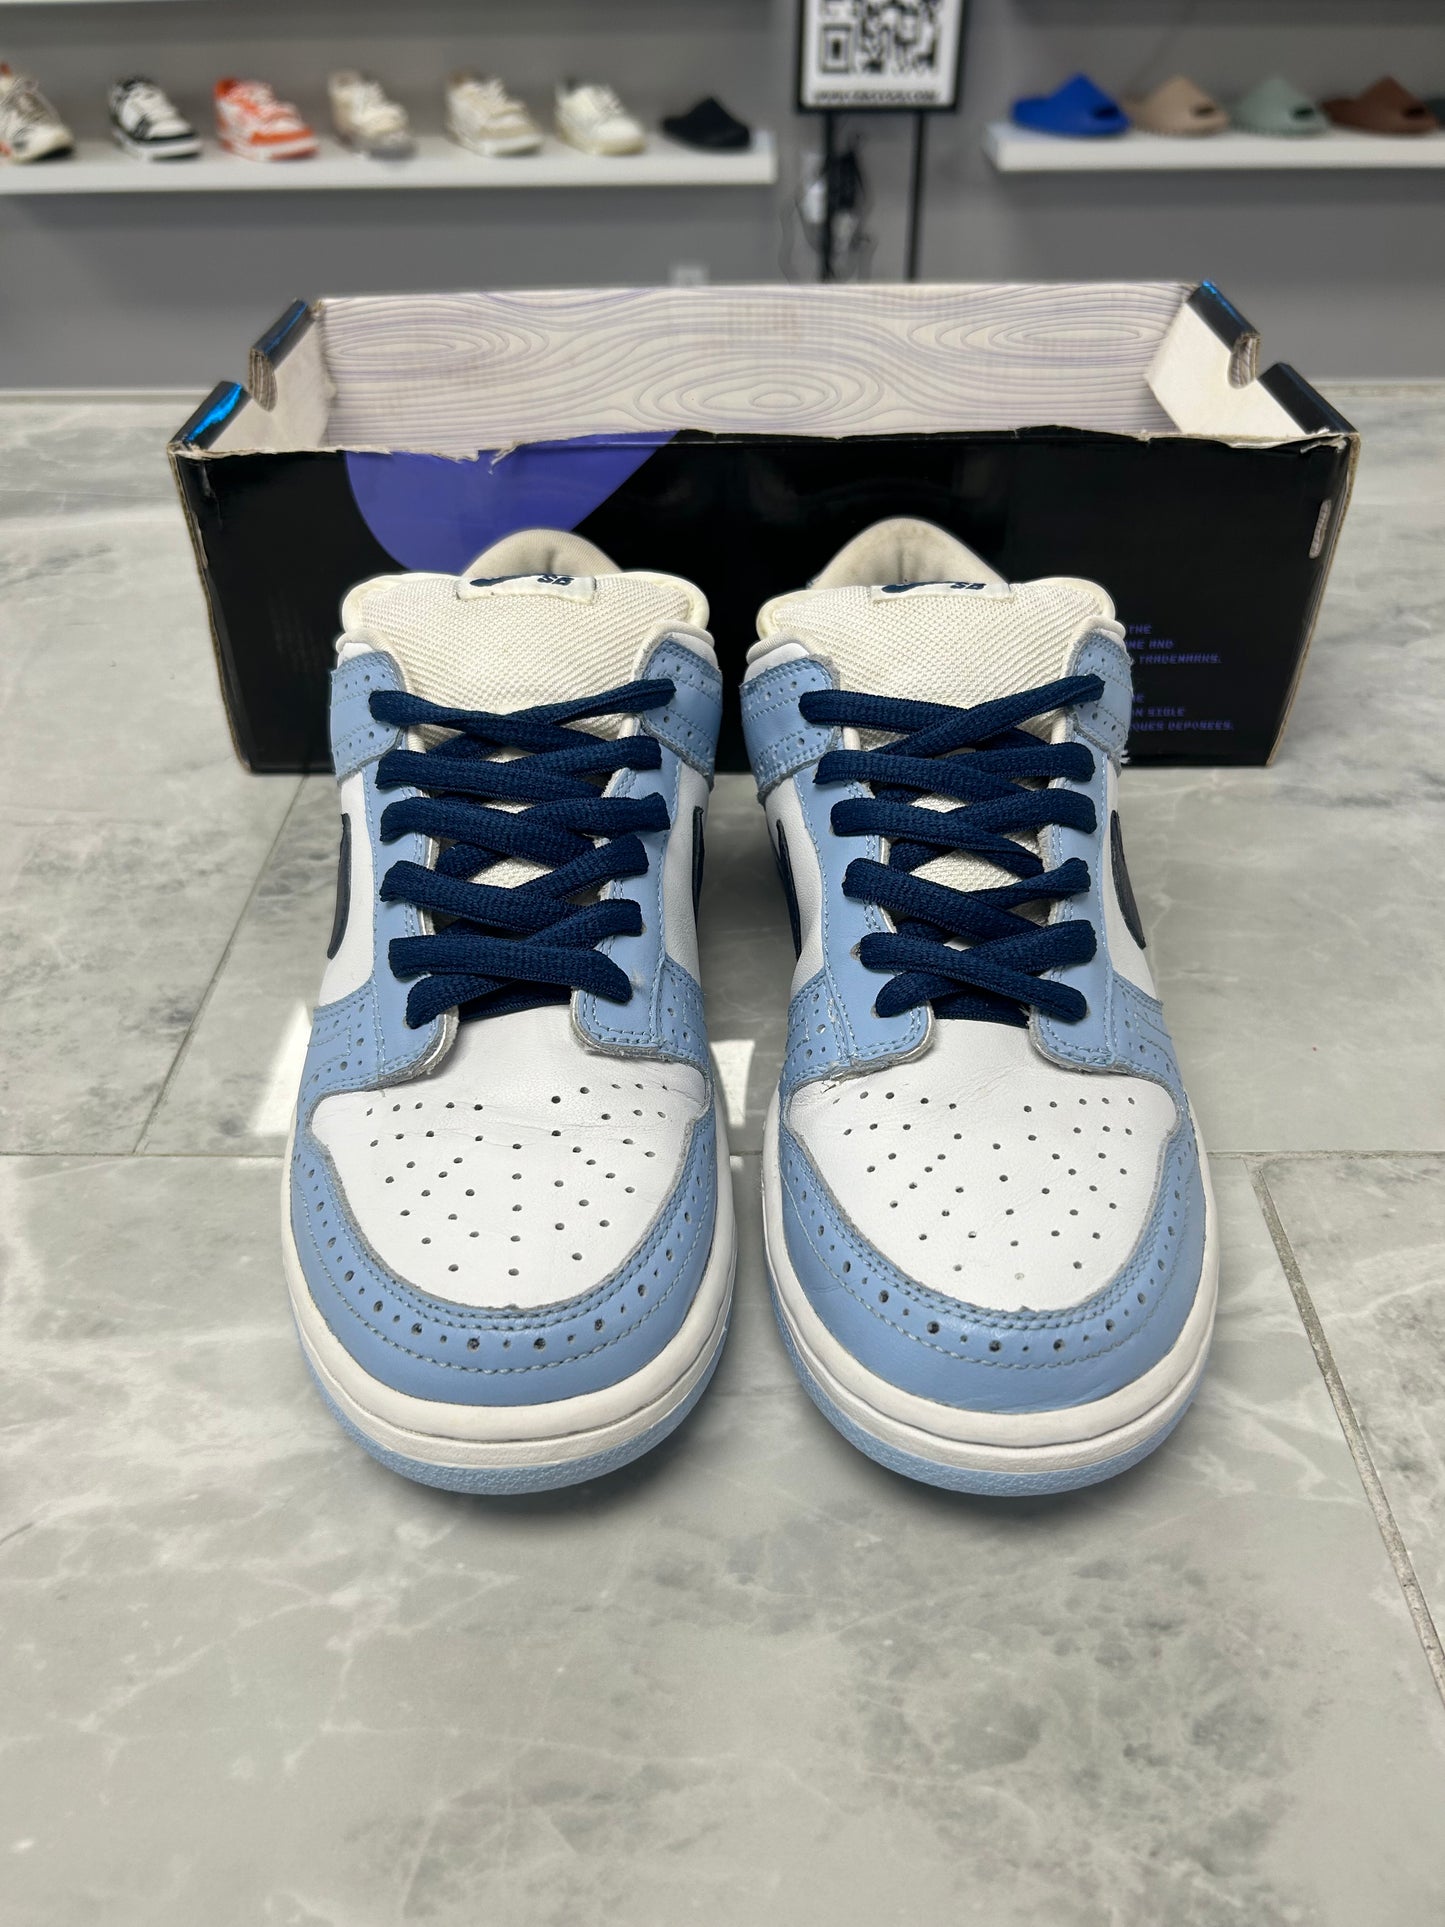 Nike SB Dunk Low Golf Pack Blue (USED)